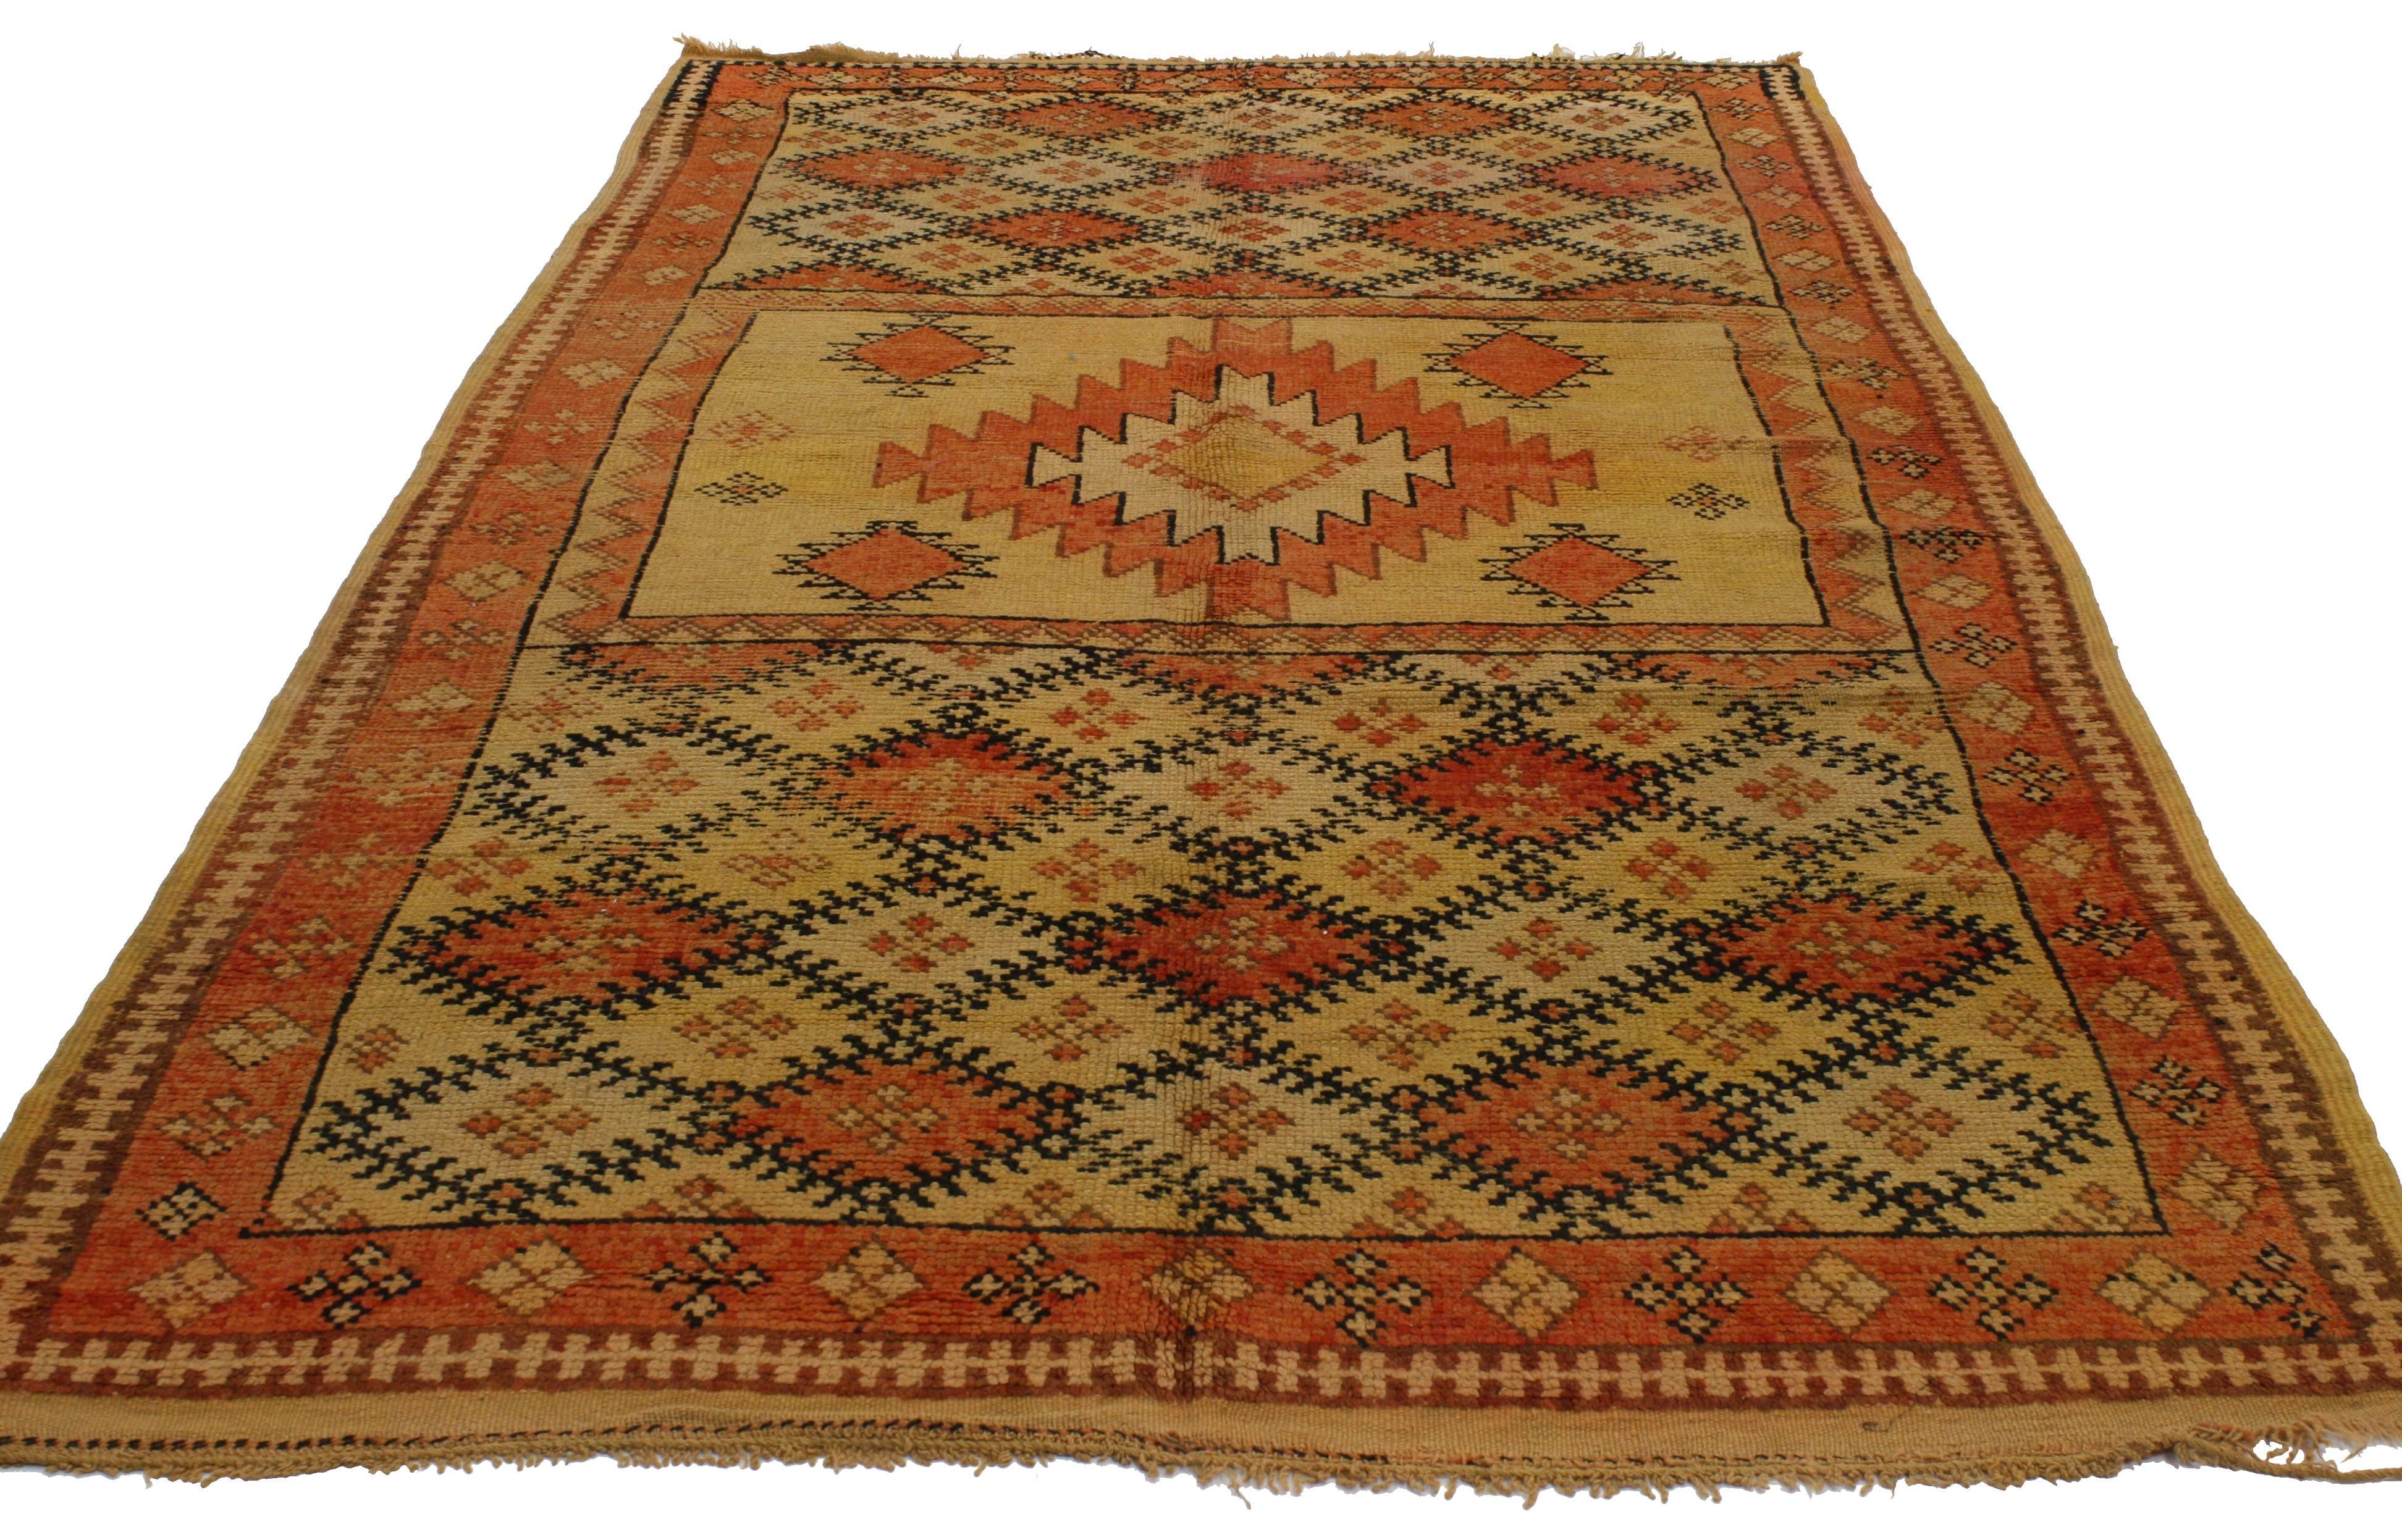 Featuring vibrant colors of turmeric orange, golden saffron, cinnamon and warm brown sugar, this Berber Moroccan rug is reminiscent of sweeping desert landscapes and the smell of incense carried by the warm afternoon breezes. The incredibly